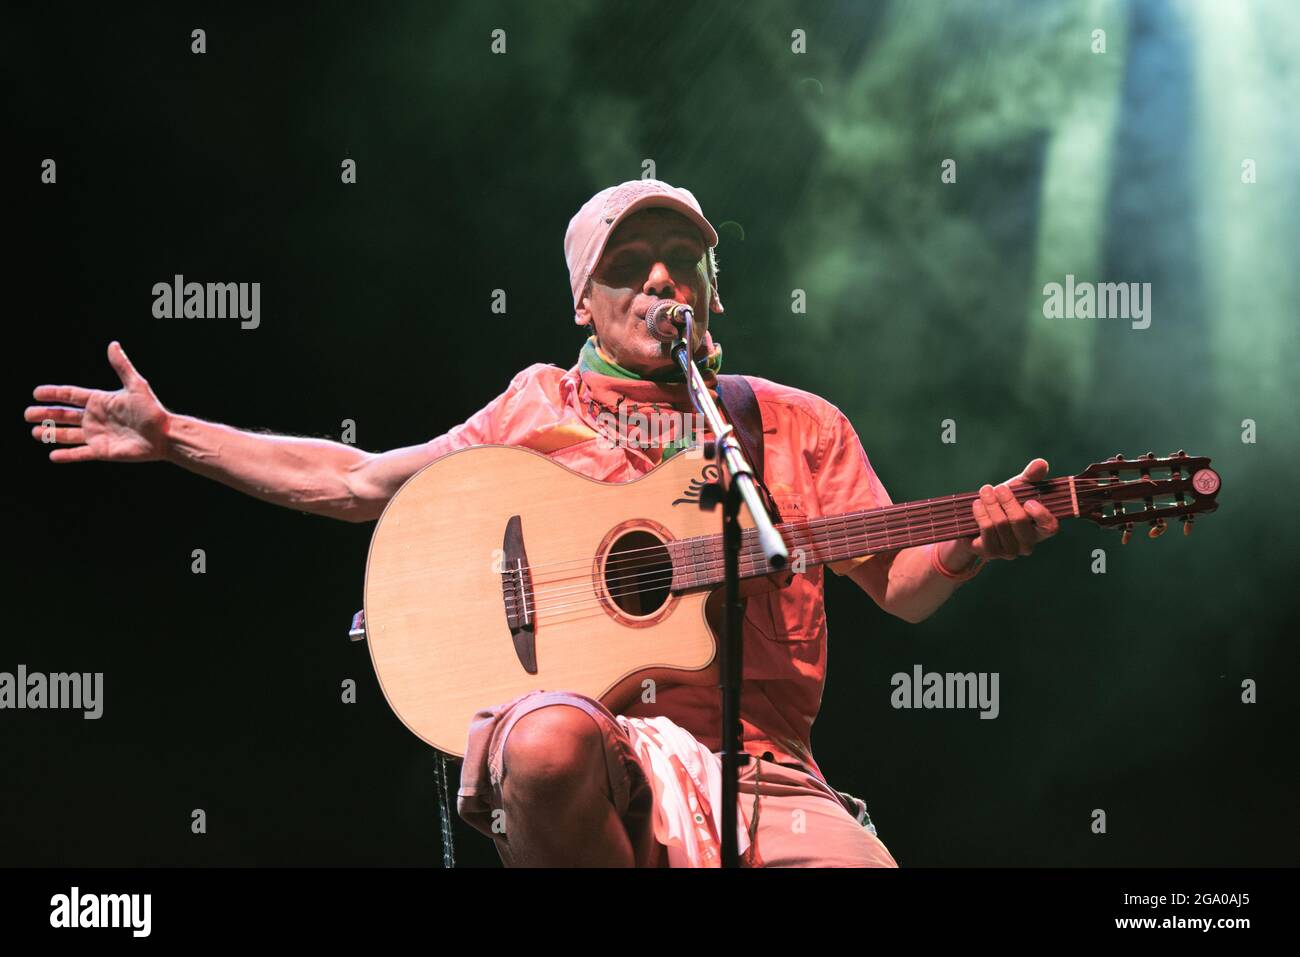 COLLEGNO, FLOWERS FESTIVAL, JULY 27TH 2021: The French singer of Spanish descent Manu Chao performing live on stage for his “El Chapulín Solo – Manu Chao Acústico” Italian tour. Stock Photo